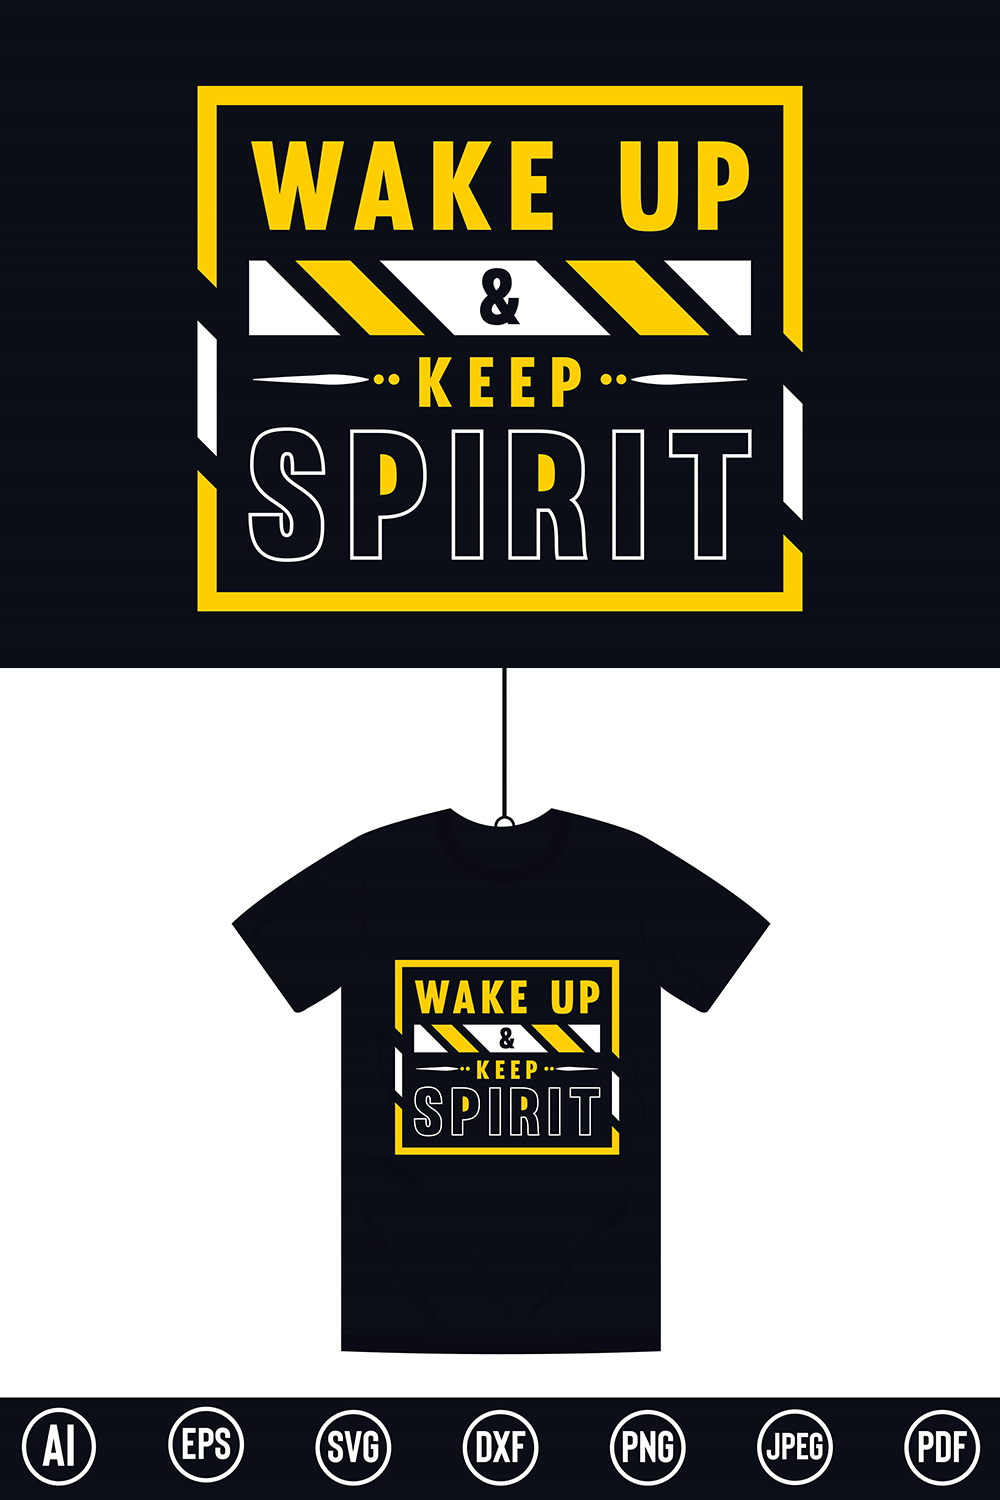 Modern Typography T-Shirt design with “Wake Up & Keep Spirit” quote for t-shirt, posters, stickers, mug prints, banners, gift cards, labels etc pinterest preview image.